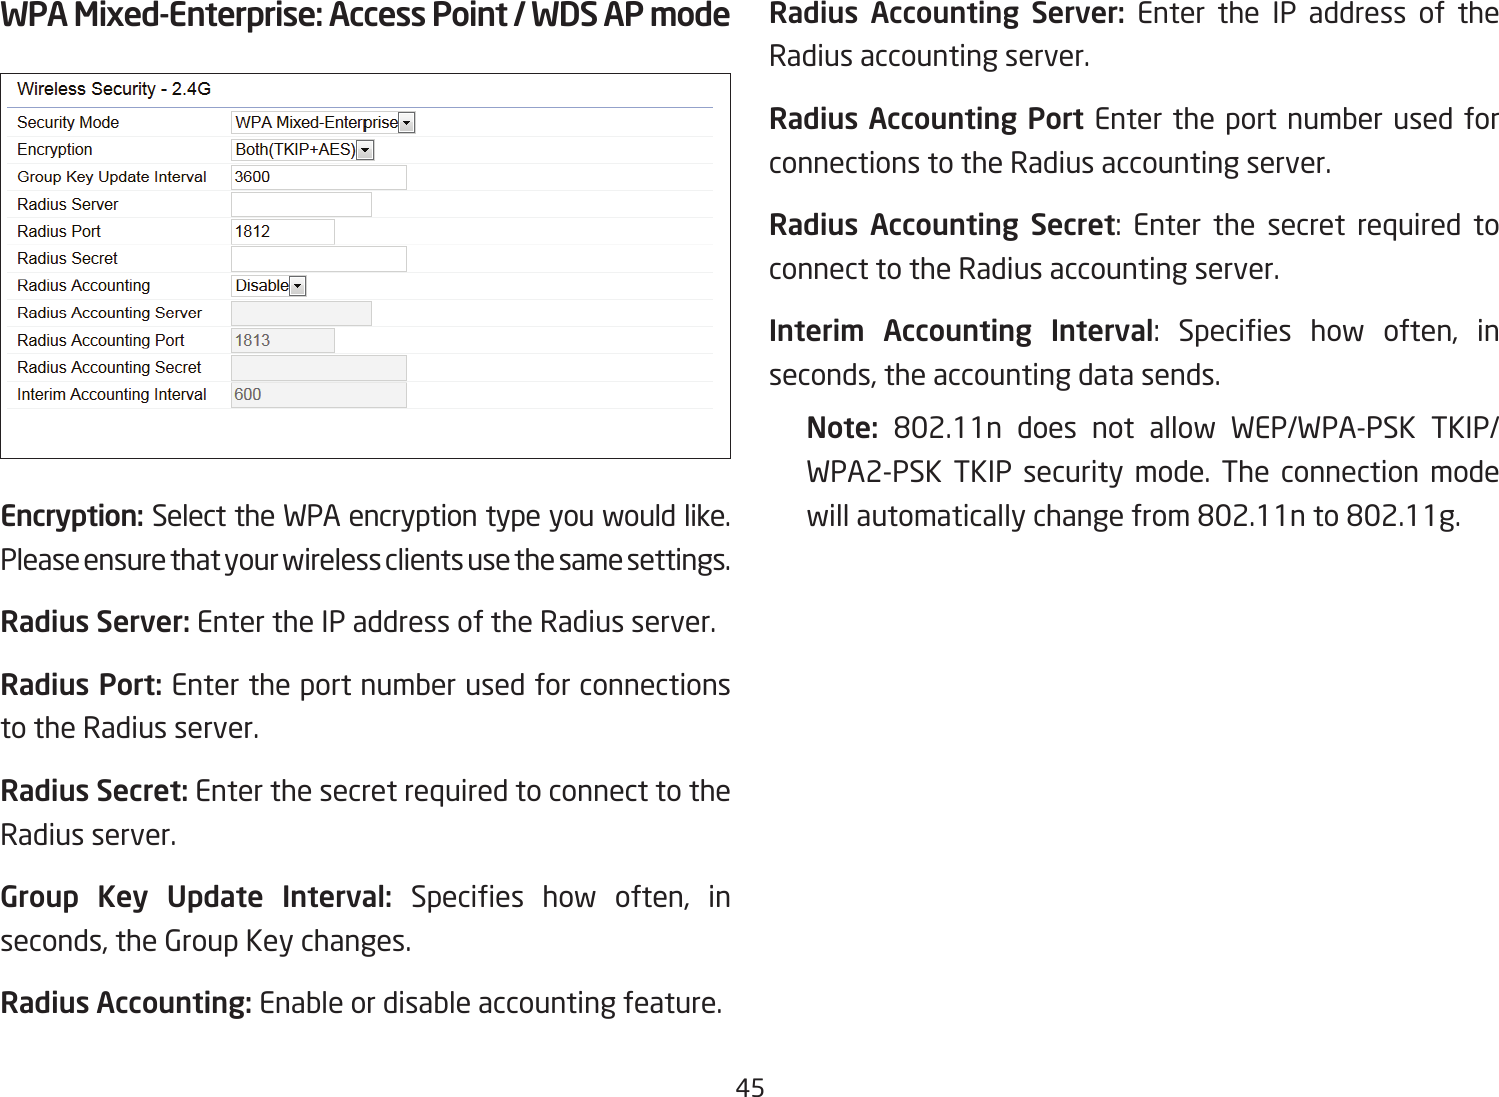 45WPA Mixed-Enterprise: Access Point / WDS AP modeEncryption: Select the WPA encryption type you would like. Please ensure that your wireless clients use the same settings.Radius Server: Enter the IP address of the Radius server.Radius Port: Enter the port number used for connections to the Radius server.Radius Secret: Enter the secret required to connect to the Radius server.Group Key Update Interval: Species how often, inseconds, the Group Key changes.Radius Accounting: Enable or disable accounting feature.Radius Accounting Server: Enter the IP address of the Radius accounting server.Radius Accounting Port Enter the port number used for connections to the Radius accounting server.Radius Accounting Secret: Enter the secret required to connect to the Radius accounting server.Interim  Accounting  Interval: Species how often, inseconds, the accounting data sends.Note:  802.11n does not allow WEP/WPA-PSK TKIP/WPA2-PSK TKIP security mode. The connection mode willautomaticallychangefrom802.11nto802.11g.